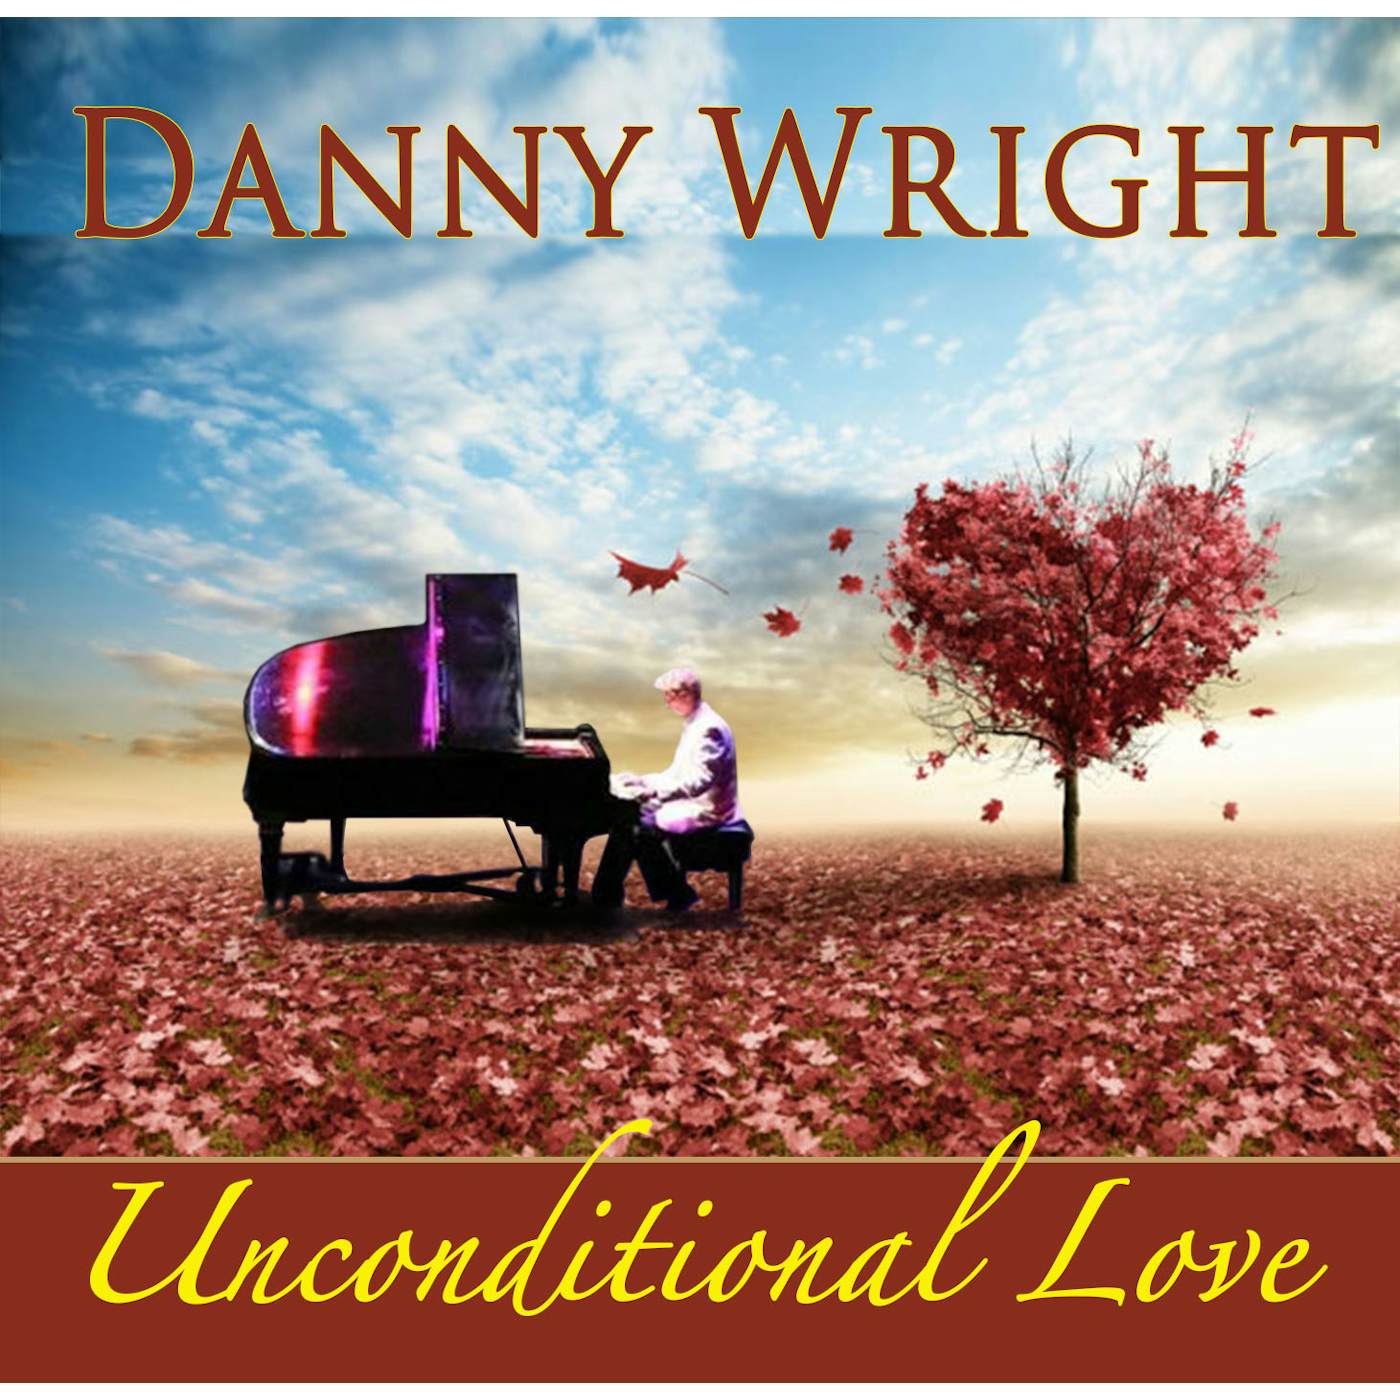 Danny Wright UNCONDITIONAL LOVE CD